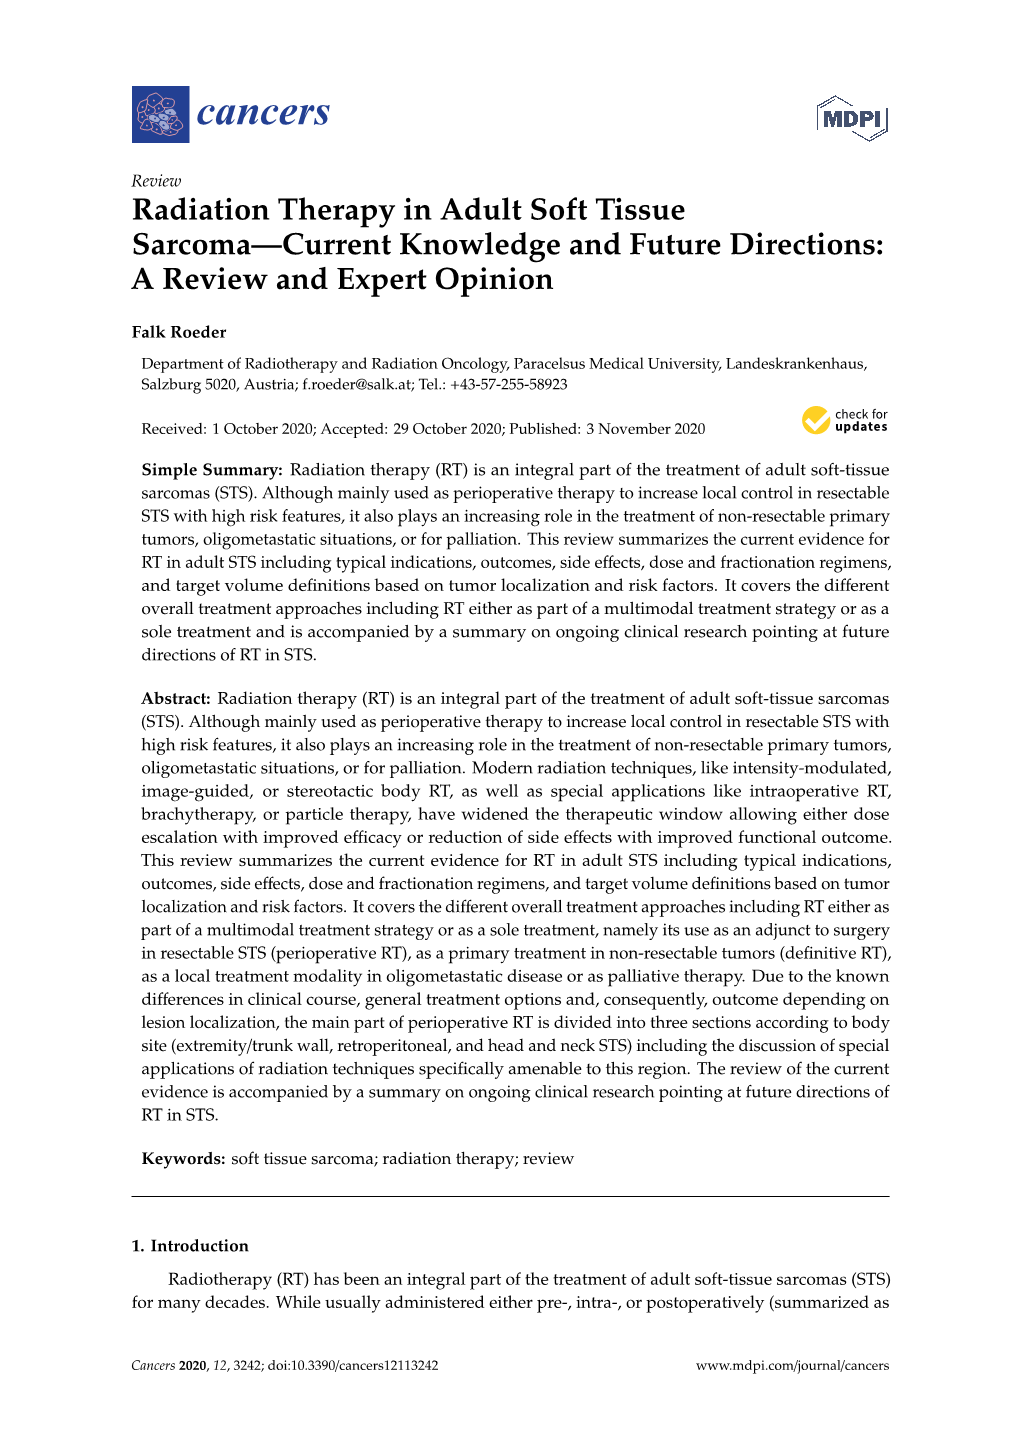 Radiation Therapy in Adult Soft Tissue Sarcoma—Current Knowledge and Future Directions: a Review and Expert Opinion